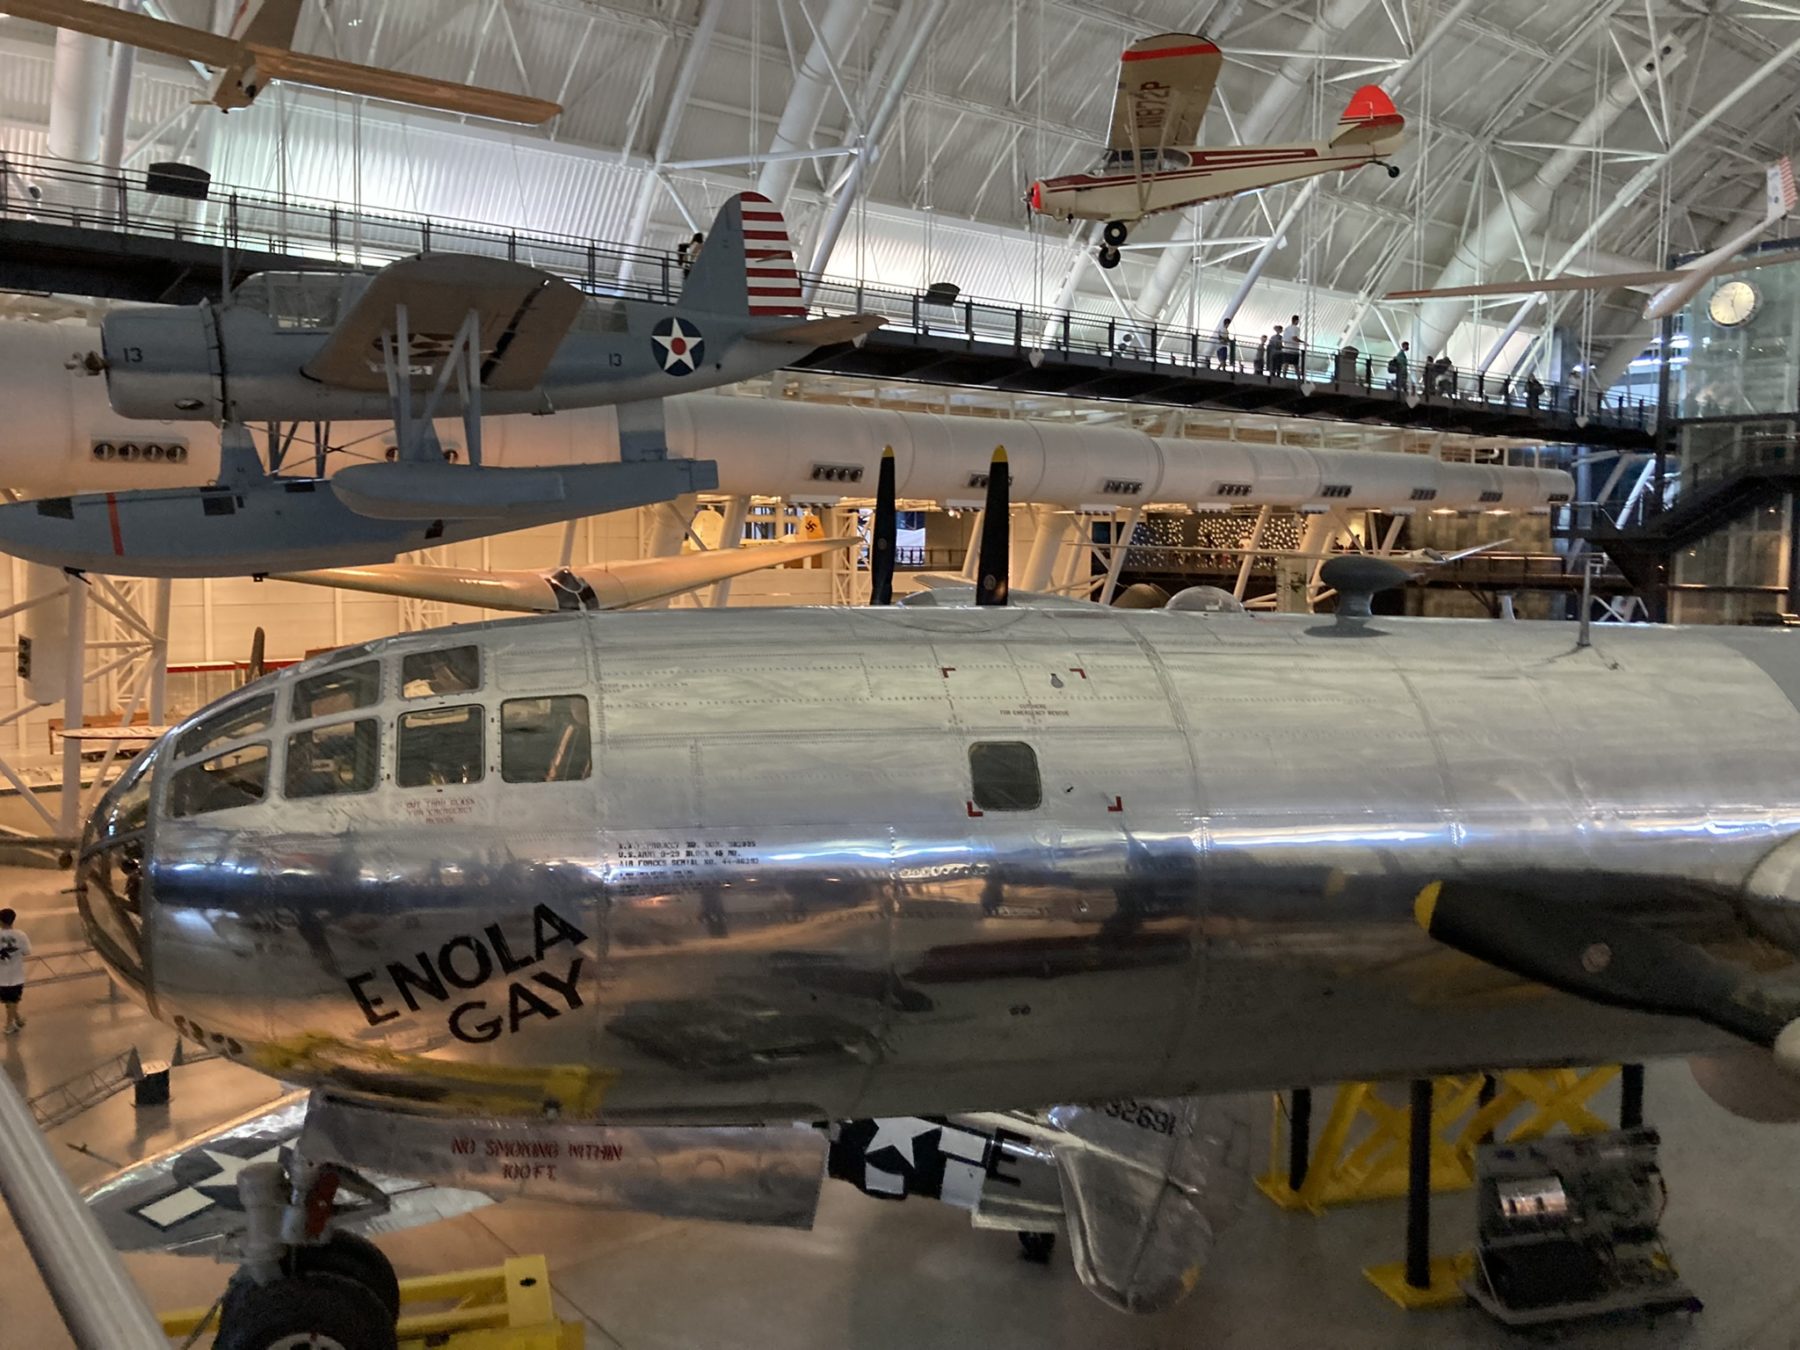 Museums for kids in DC - Chantilly Air and Space